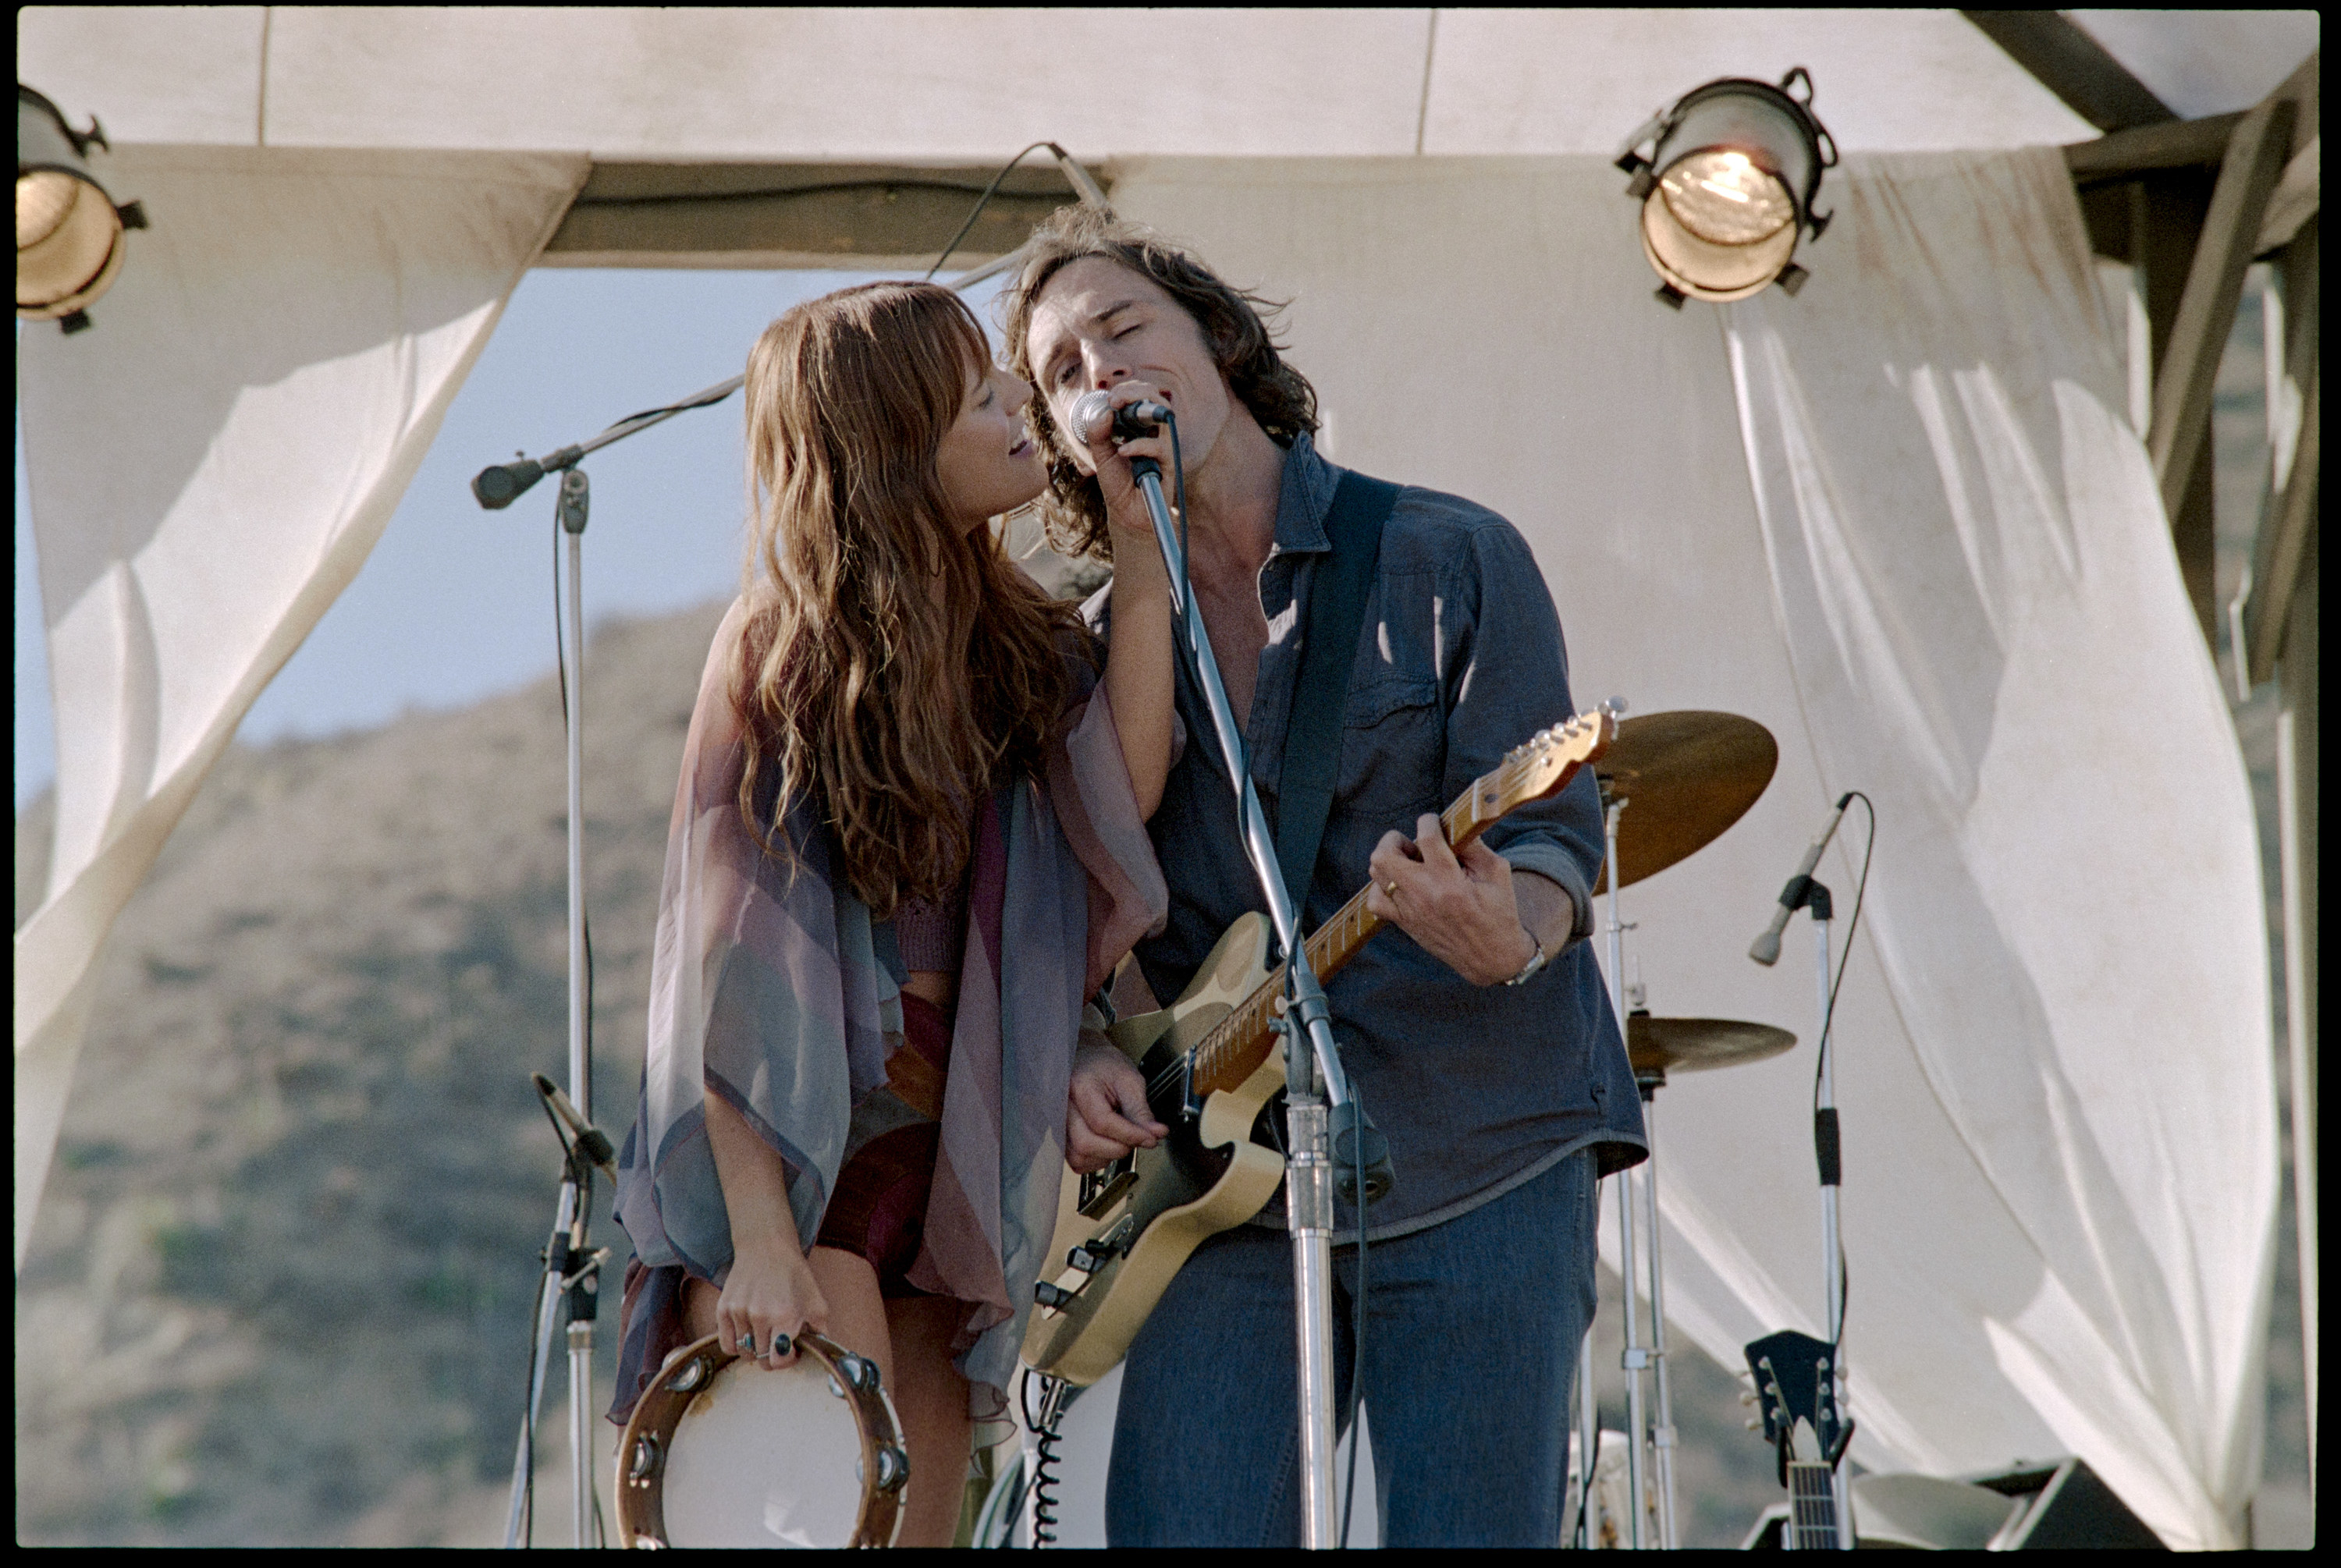 Daisy and Billy sing into the same microphone as Billy plays a guitar and Daisy holds a tambourine